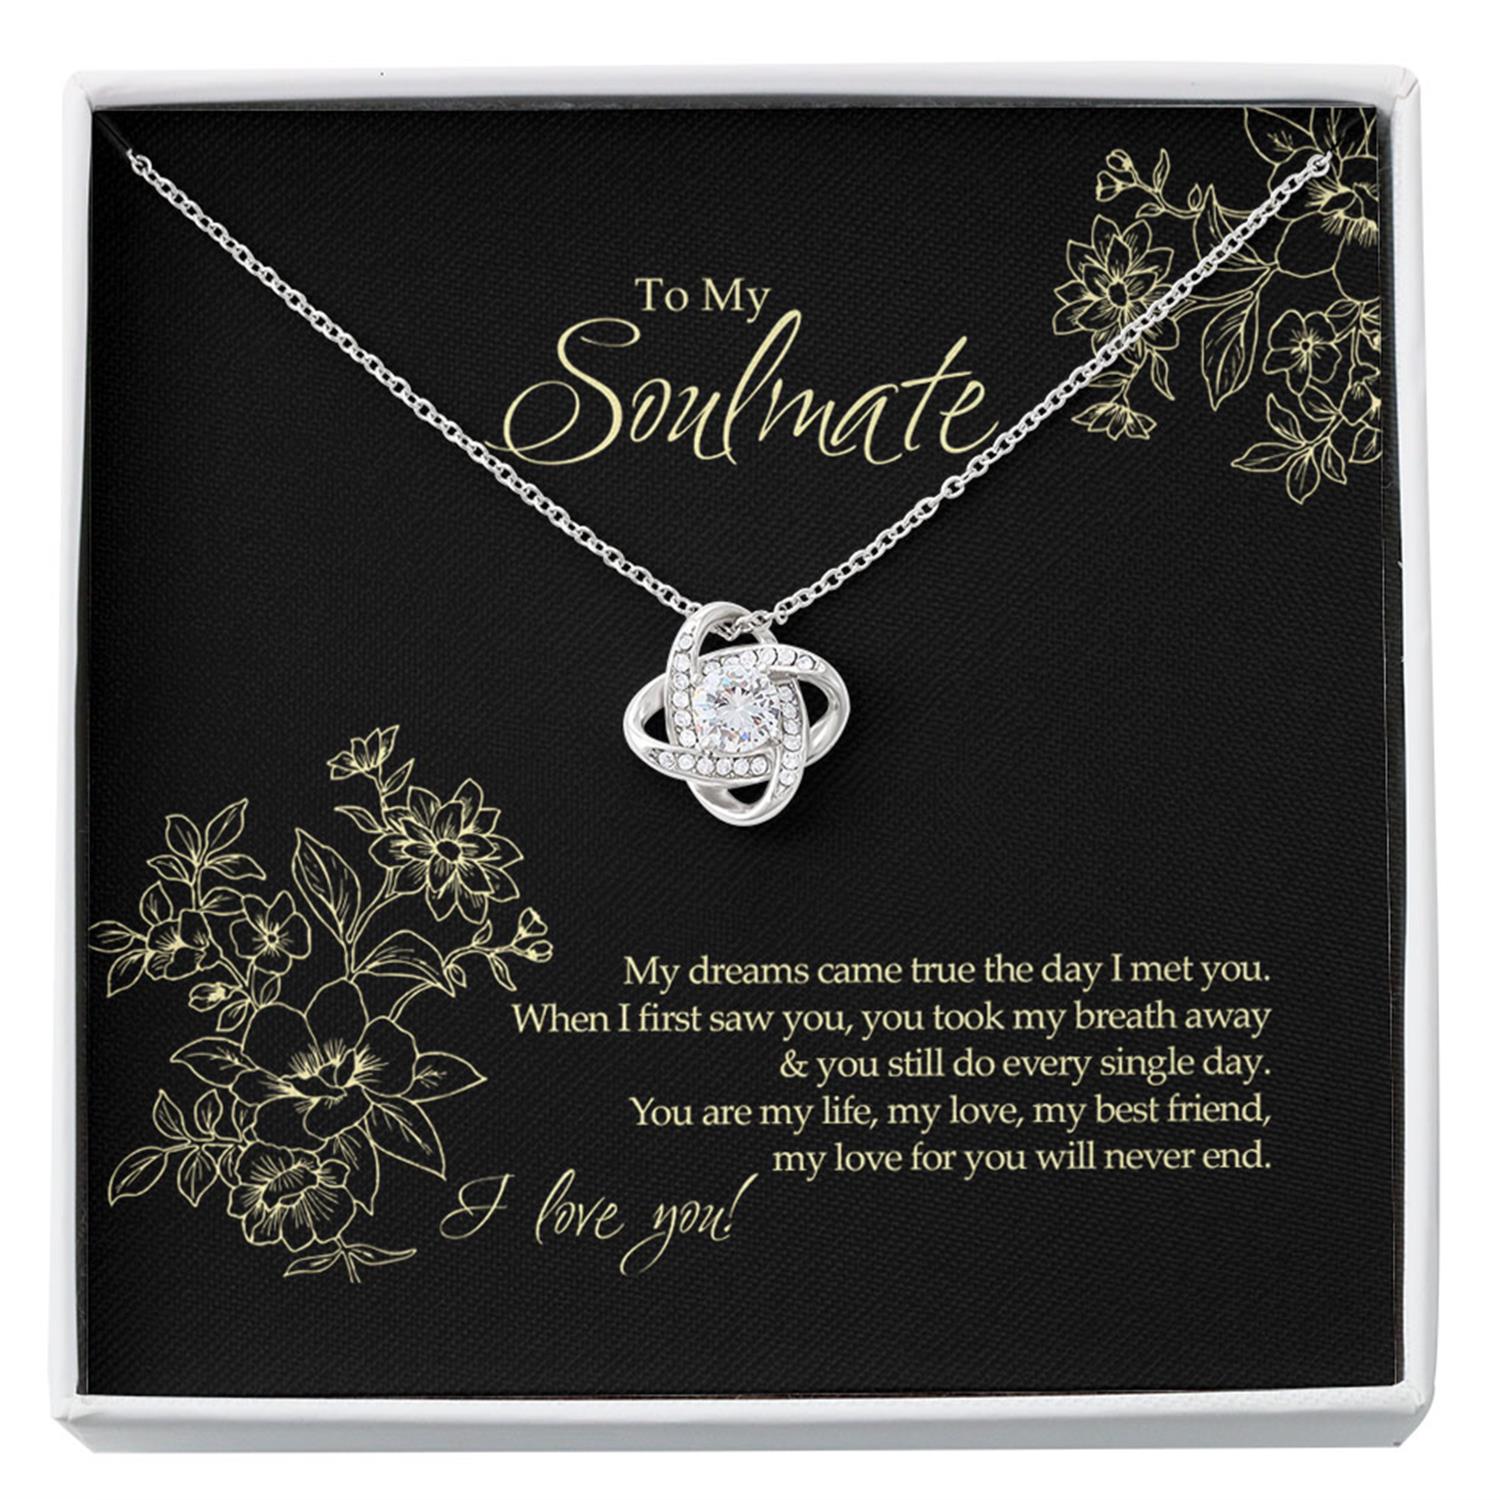 Soulmate Necklace, To My Soulmate Necklace Gift, Gift For Girlfriend, Soulmate Necklace, Gift For Her Custom Necklace